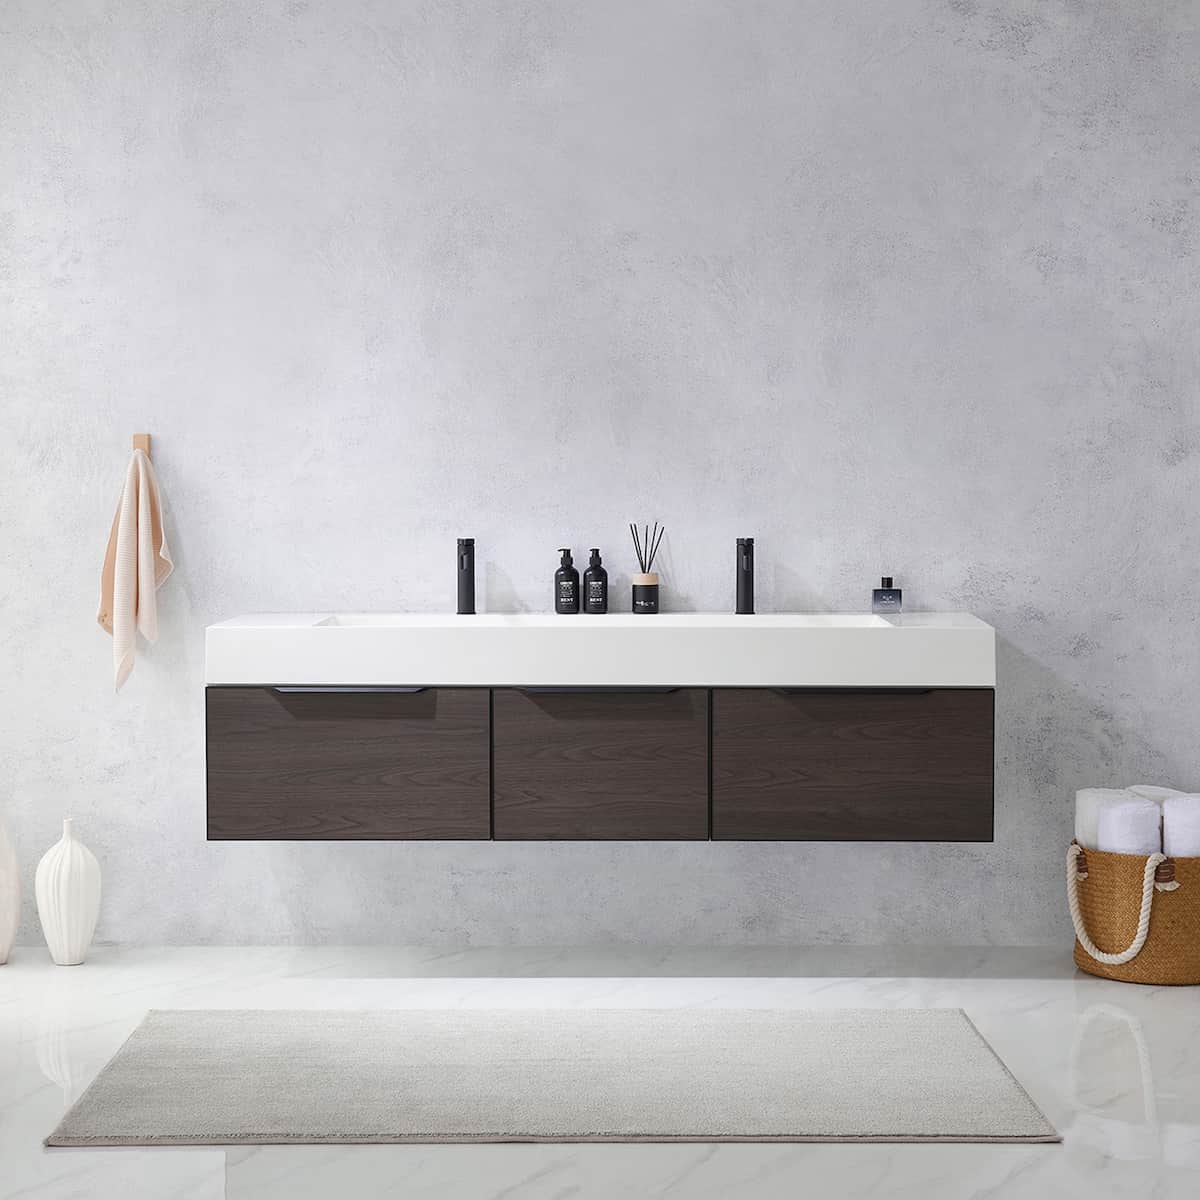 Vinnova Vegadeo 72 Inch Wall Mount Double Sink Bath Vanity in Suleiman Oak Finish with White One-Piece Composite Stone Sink Top Without Mirror in Bathroom 703472-SO-WH-NM